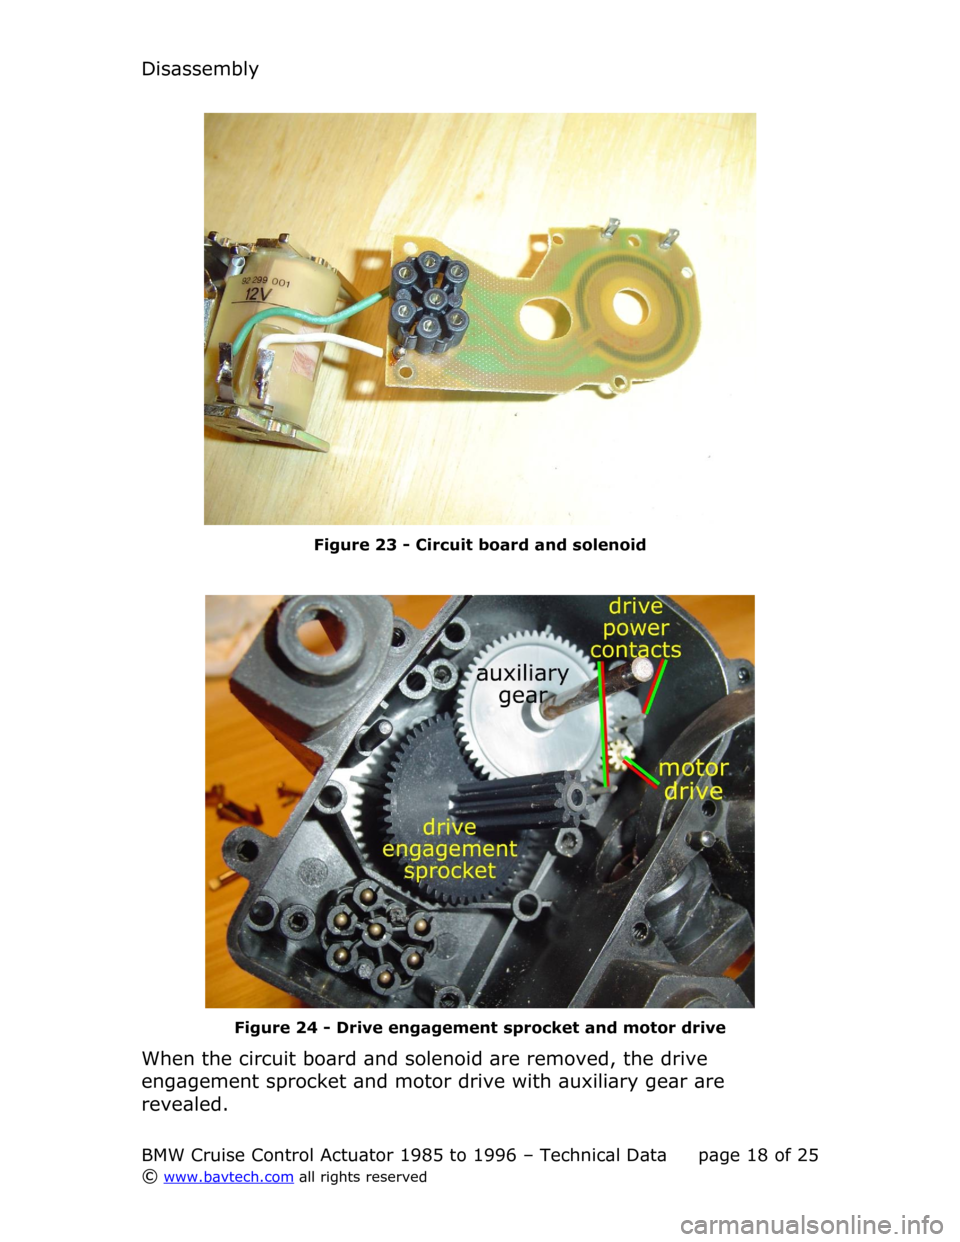 BMW 5 SERIES 1994 E34 Cruise Control Acutator Disassembly
Figure  23  - Circuit board and solenoid
Figure  24  - Drive engagement sprocket and motor drive
When the circuit board and solenoid are removed, the drive  
engagement sprocket and motor 